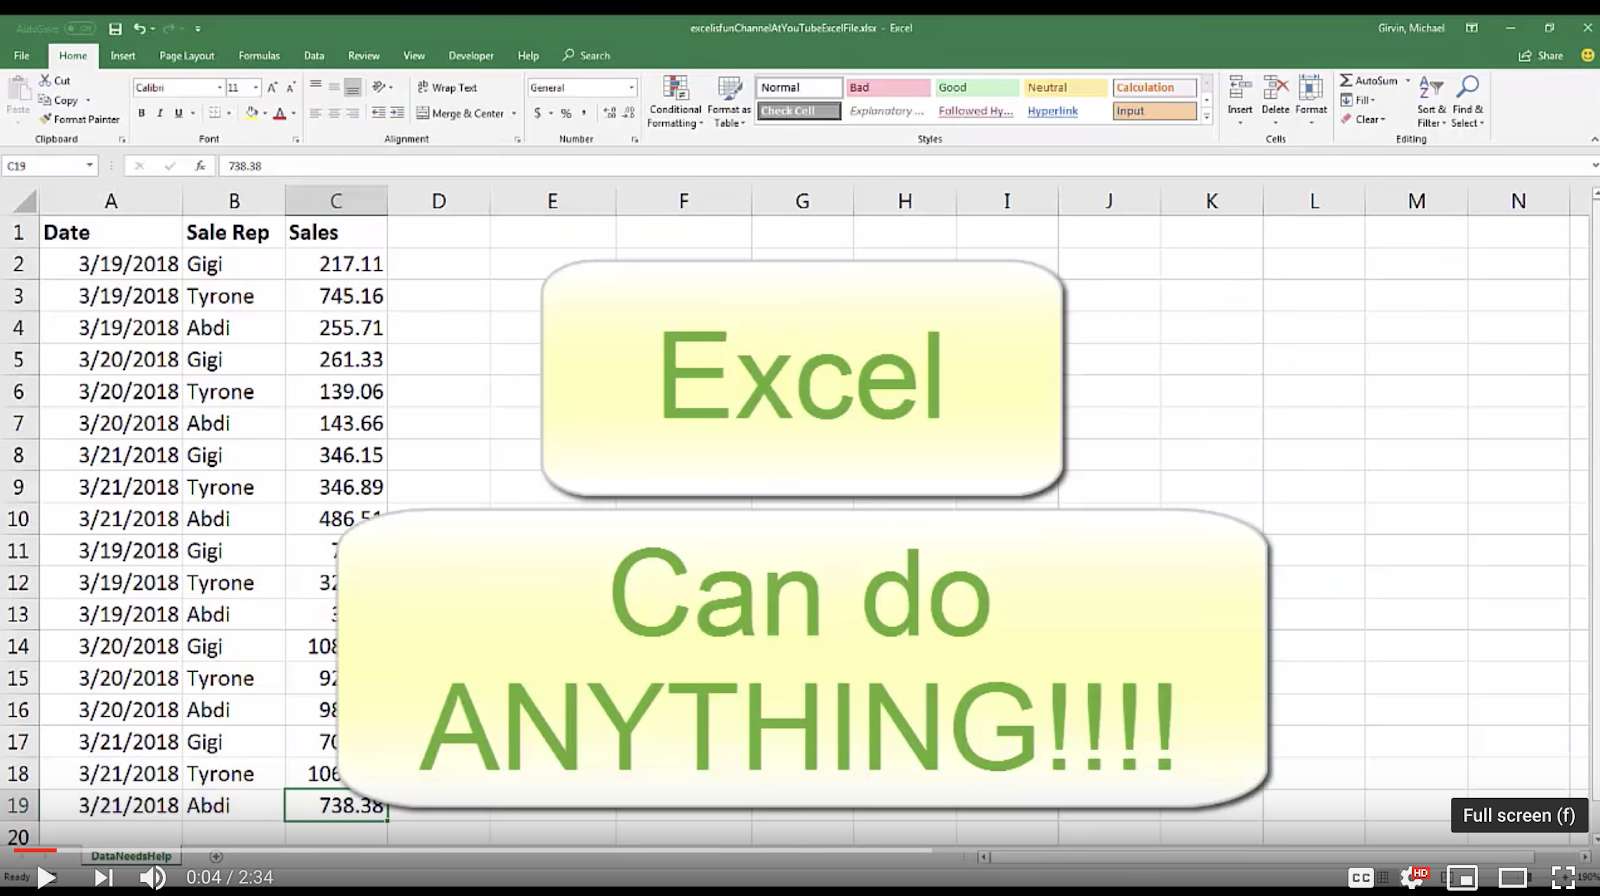 Excel spreadsheet with sales data and a prominently displayed, enthusiastic message stating "Excel Can do ANYTHING!!!!" reflecting the versatility and powerful capabilities of the software.